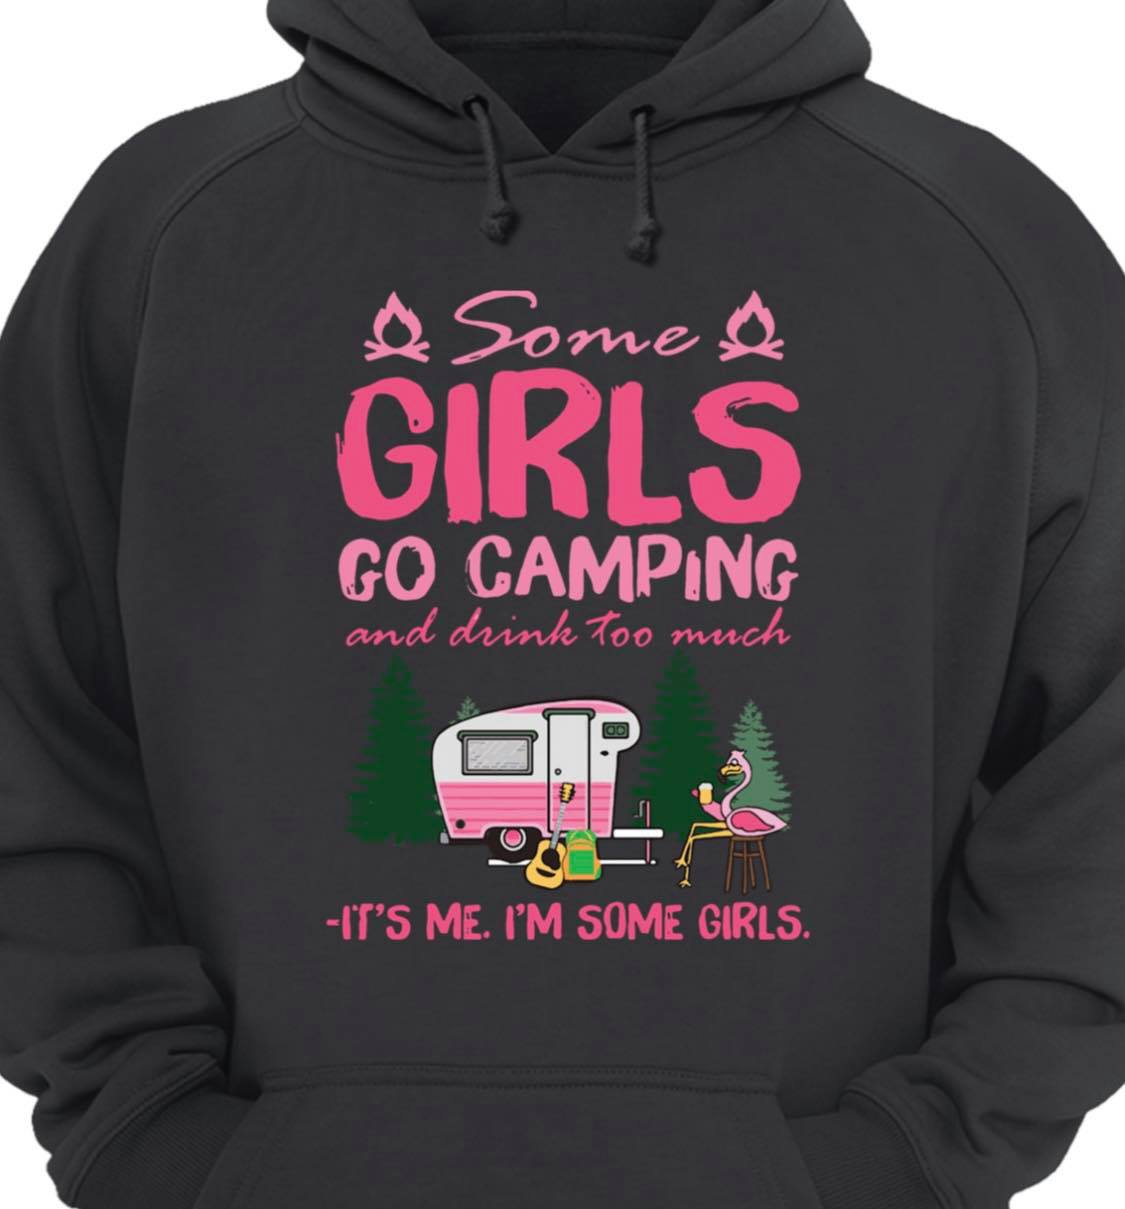 Some girls go camping and drink too much - Camping girl and flamingo